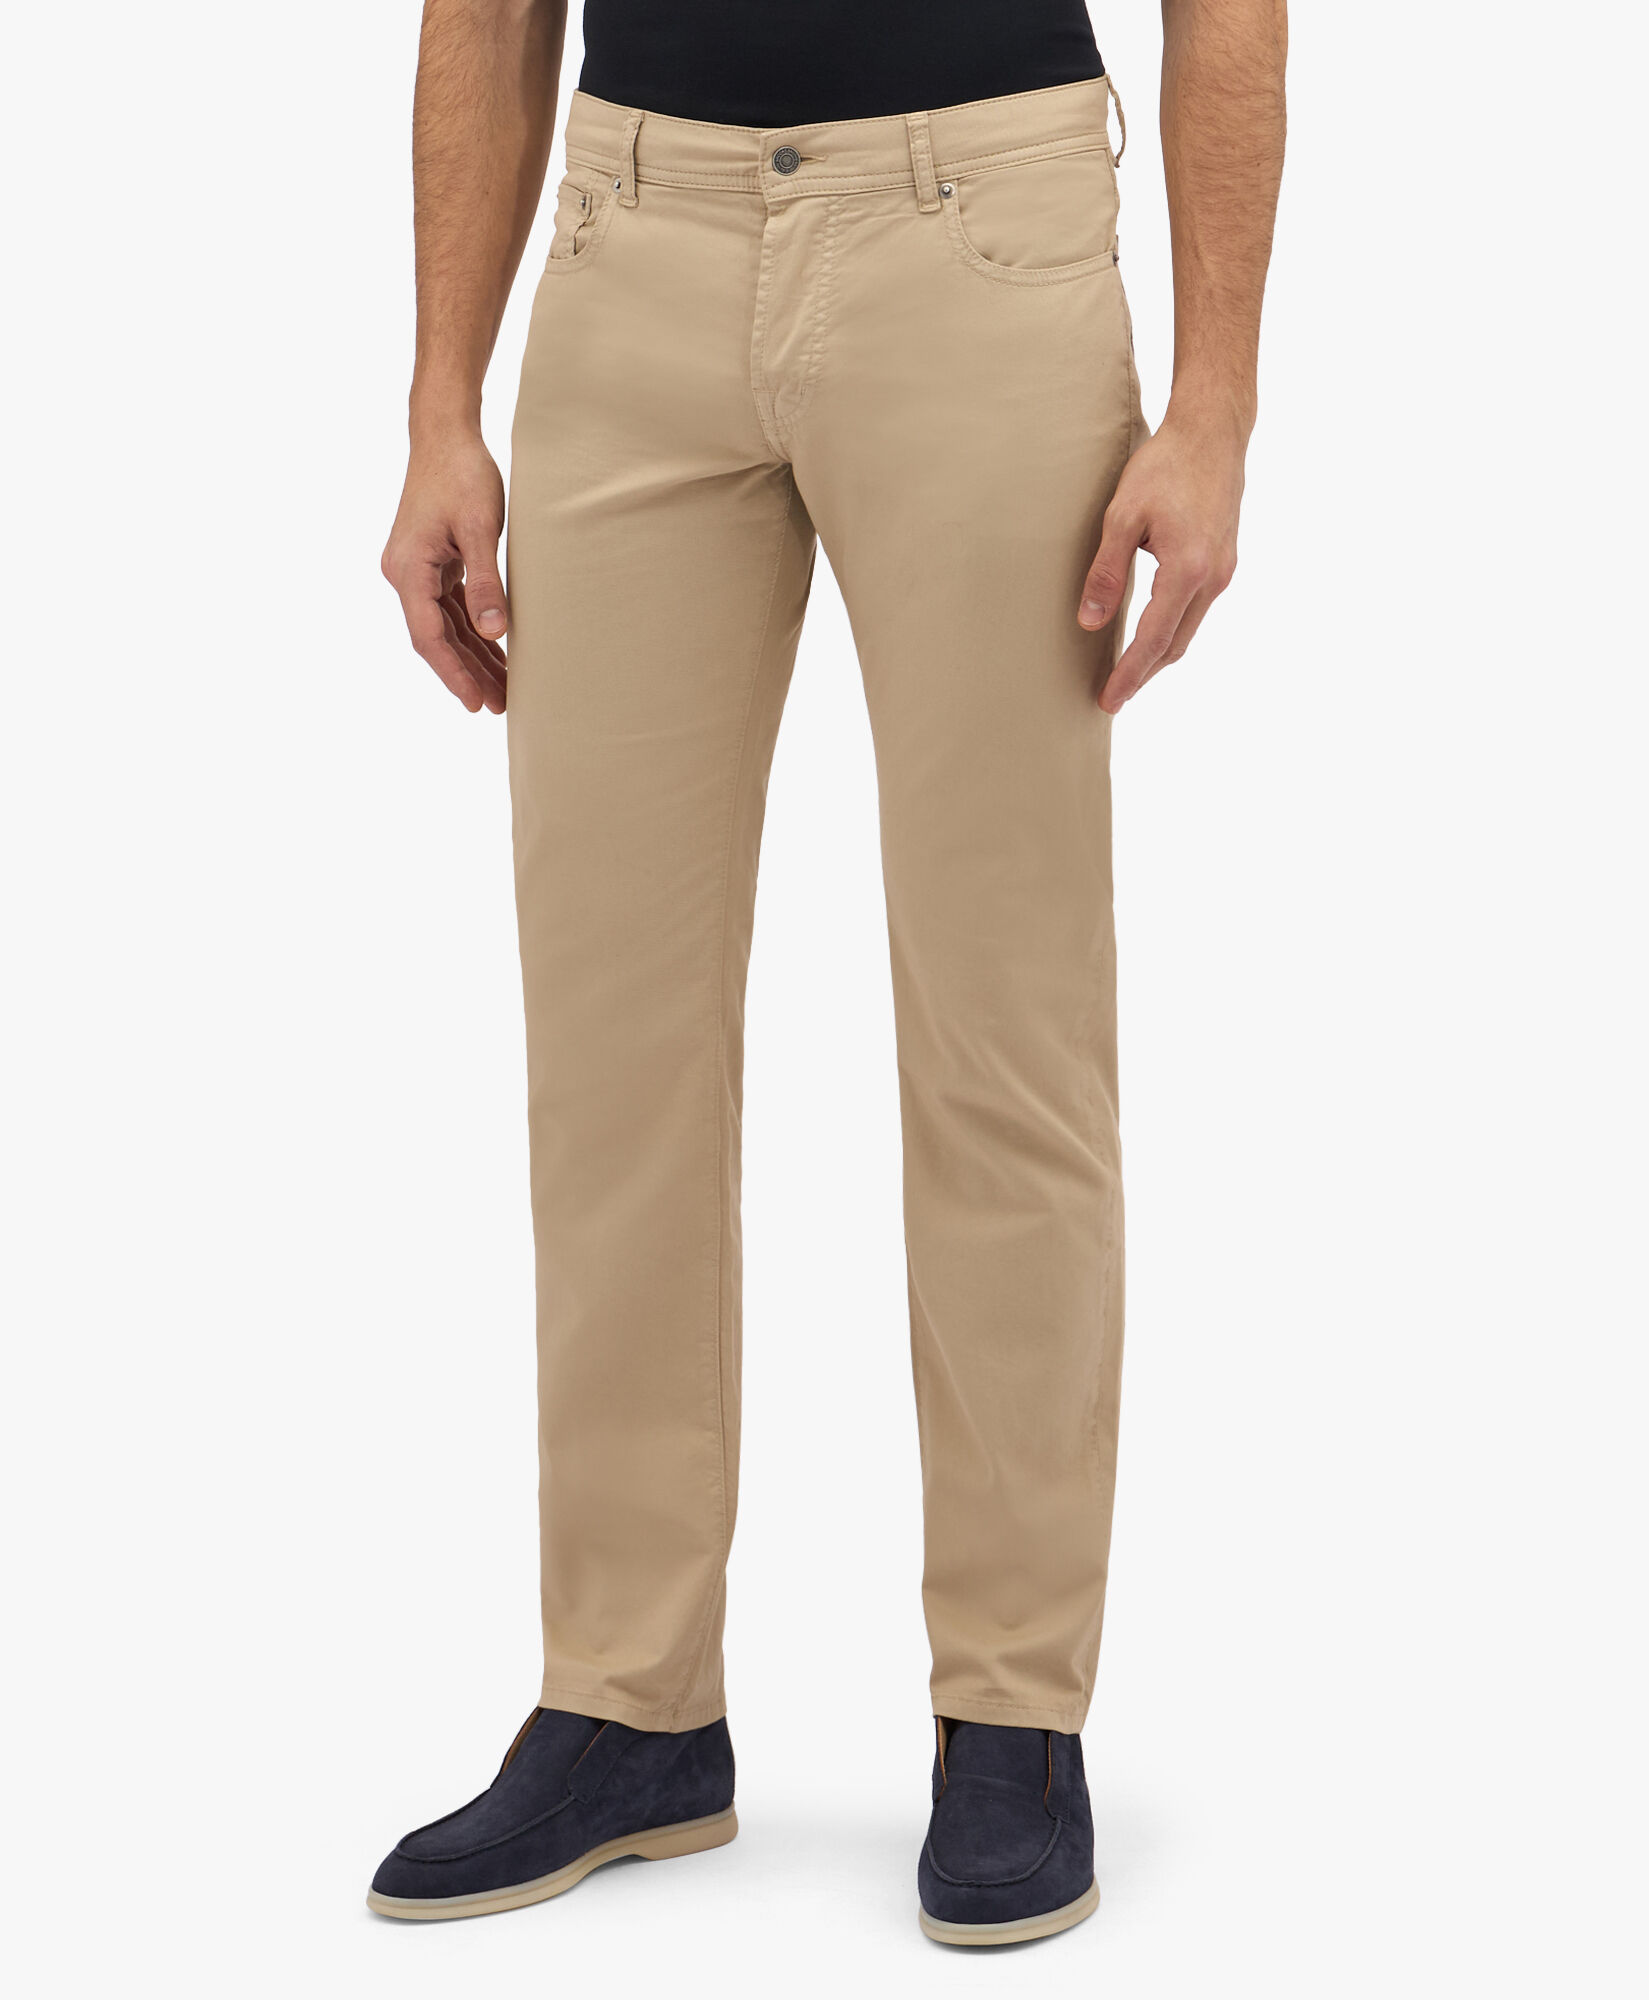 Men's Casual Trousers: Chinos, Khakis & Jeans | Brooks Brothers®